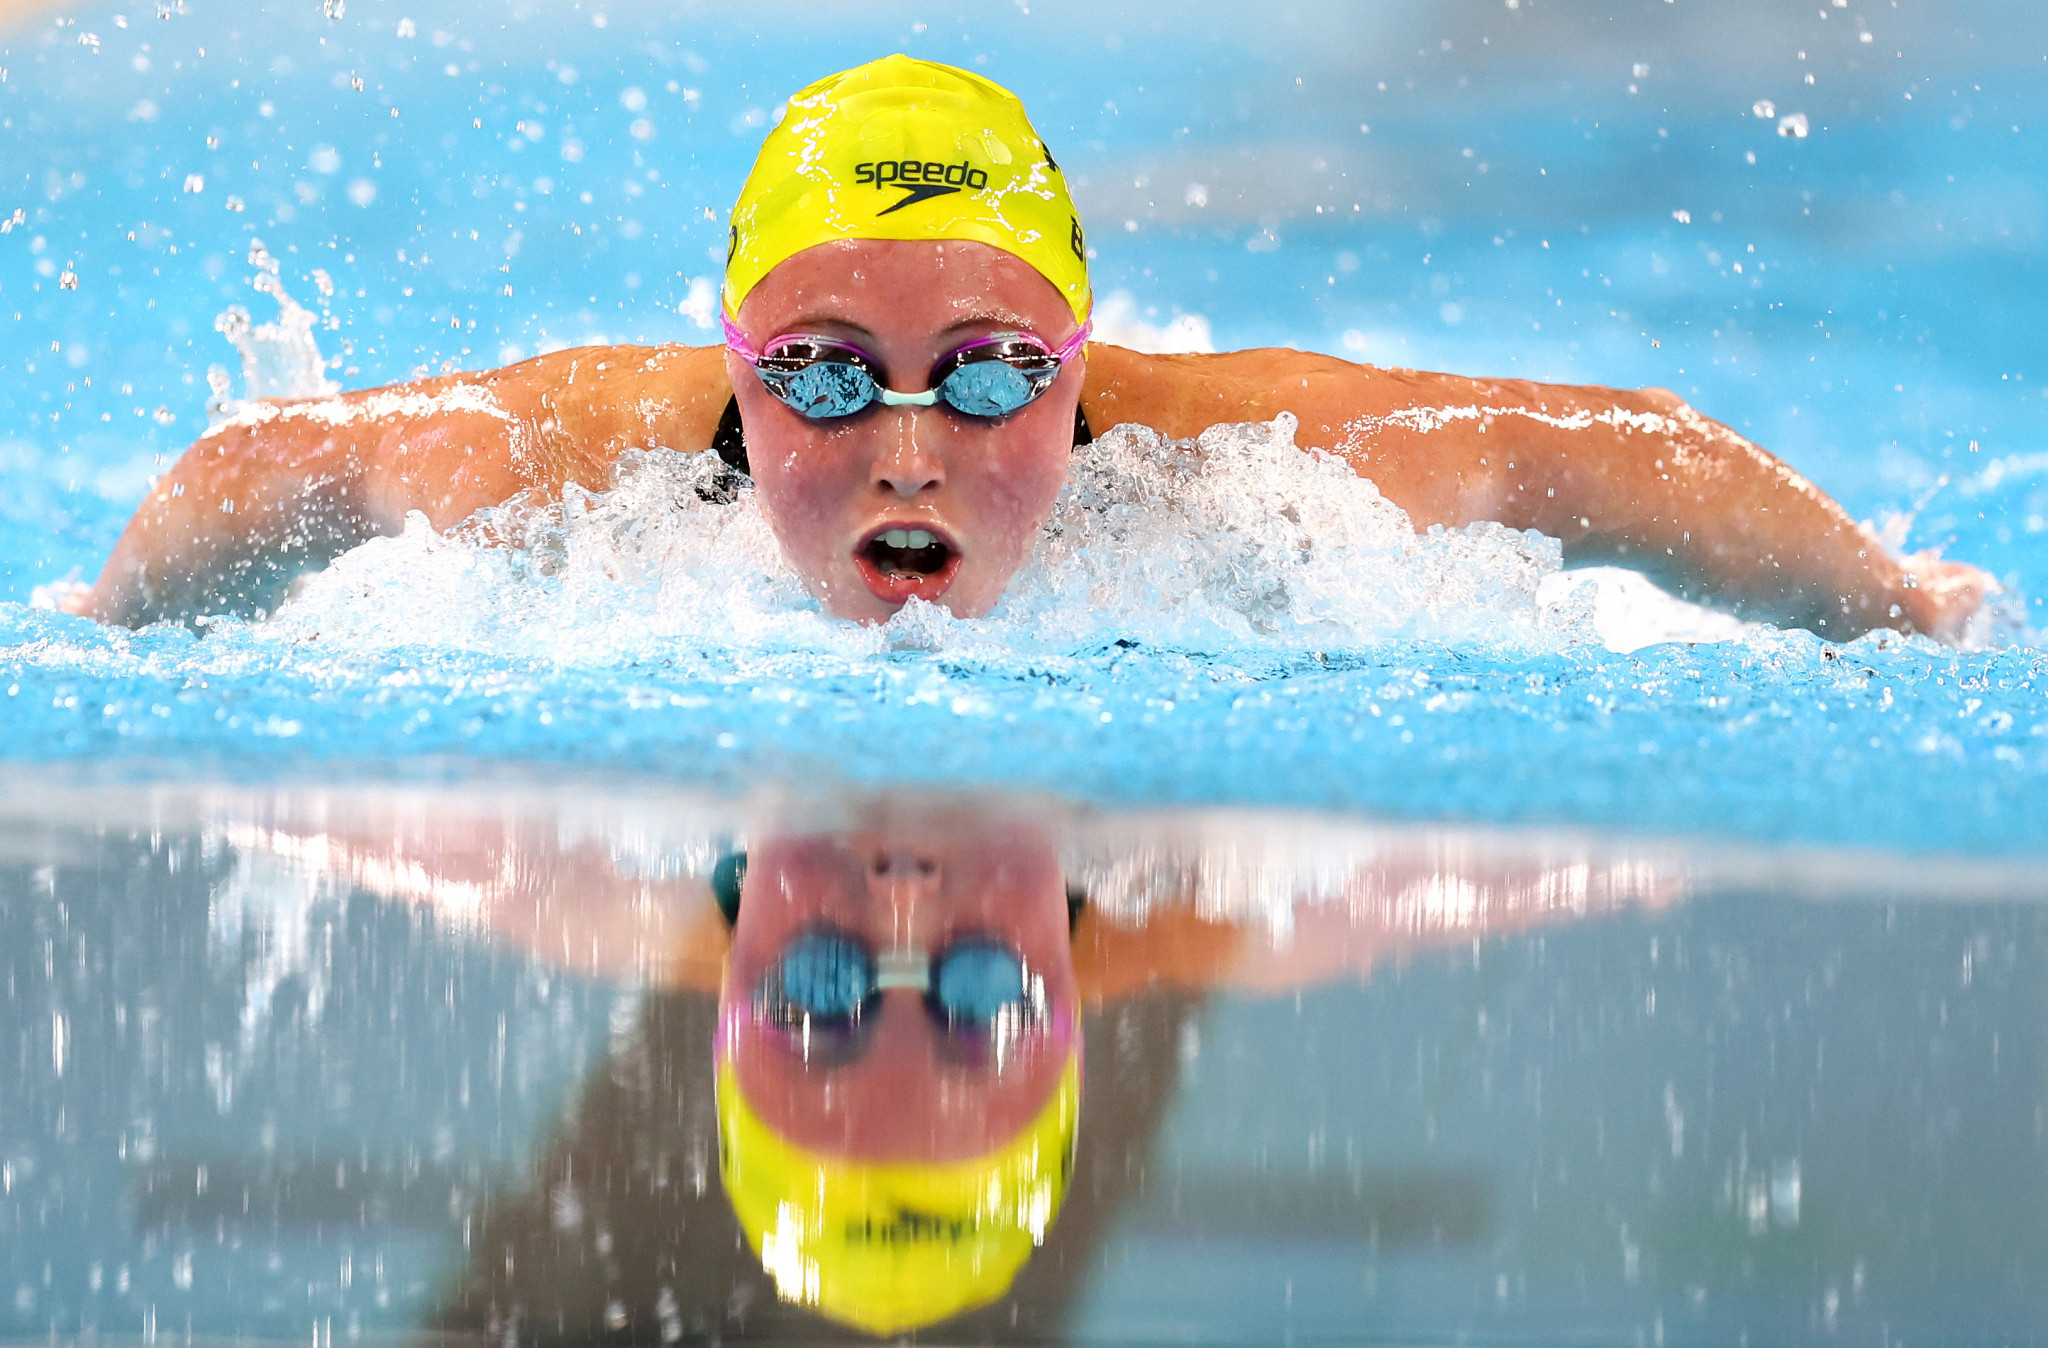 Mikayla Bird of Australia earned her second swimming gold of the Games in the women's 200m butterfly  ©Getty Images